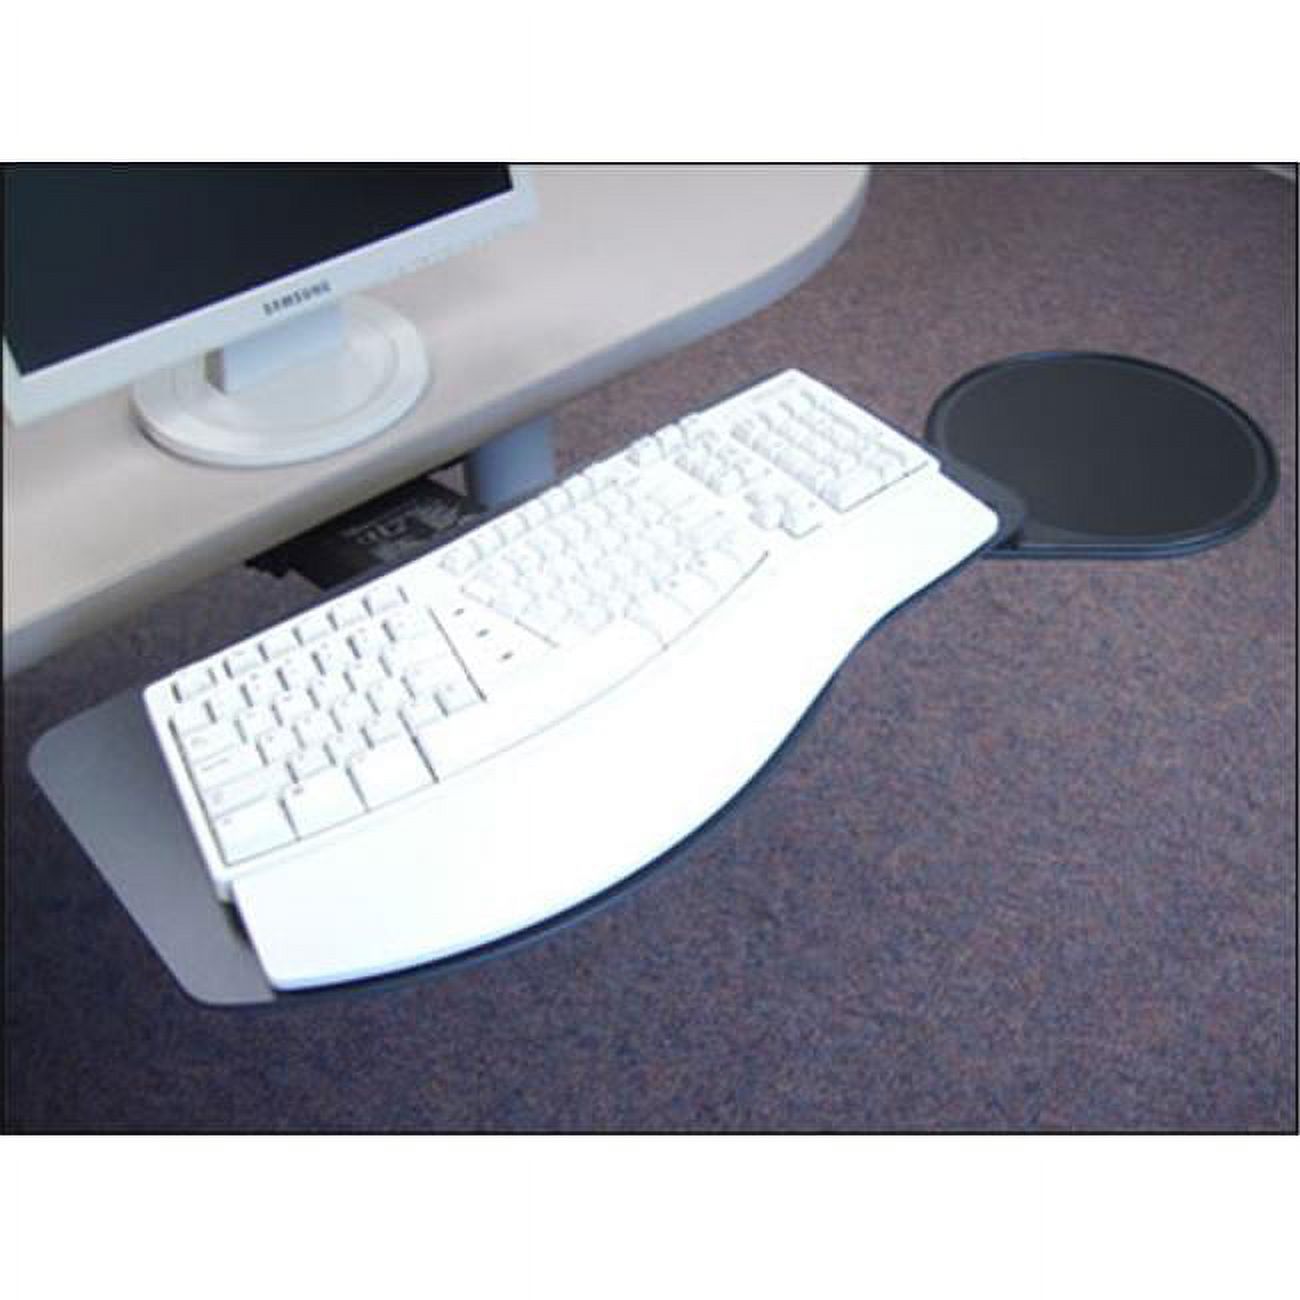 Slimline Natural Phenolic Keyboard Platform With Swivel Mouse & Lever Free Extended Arm - image 1 of 1